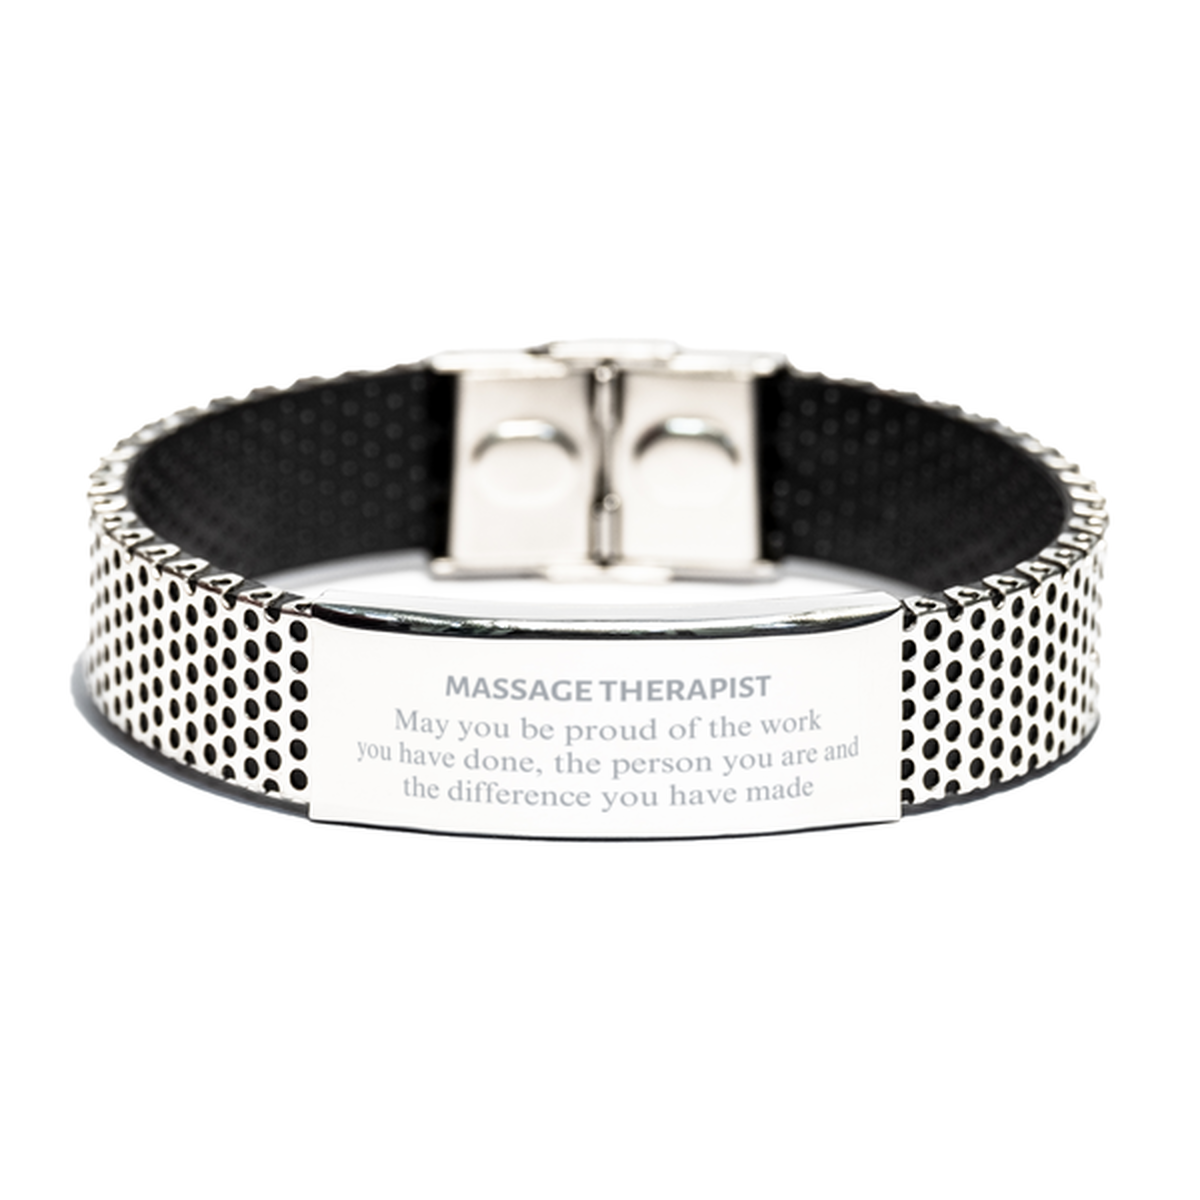 Massage Therapist May you be proud of the work you have done, Retirement Massage Therapist Stainless Steel Bracelet for Colleague Appreciation Gifts Amazing for Massage Therapist